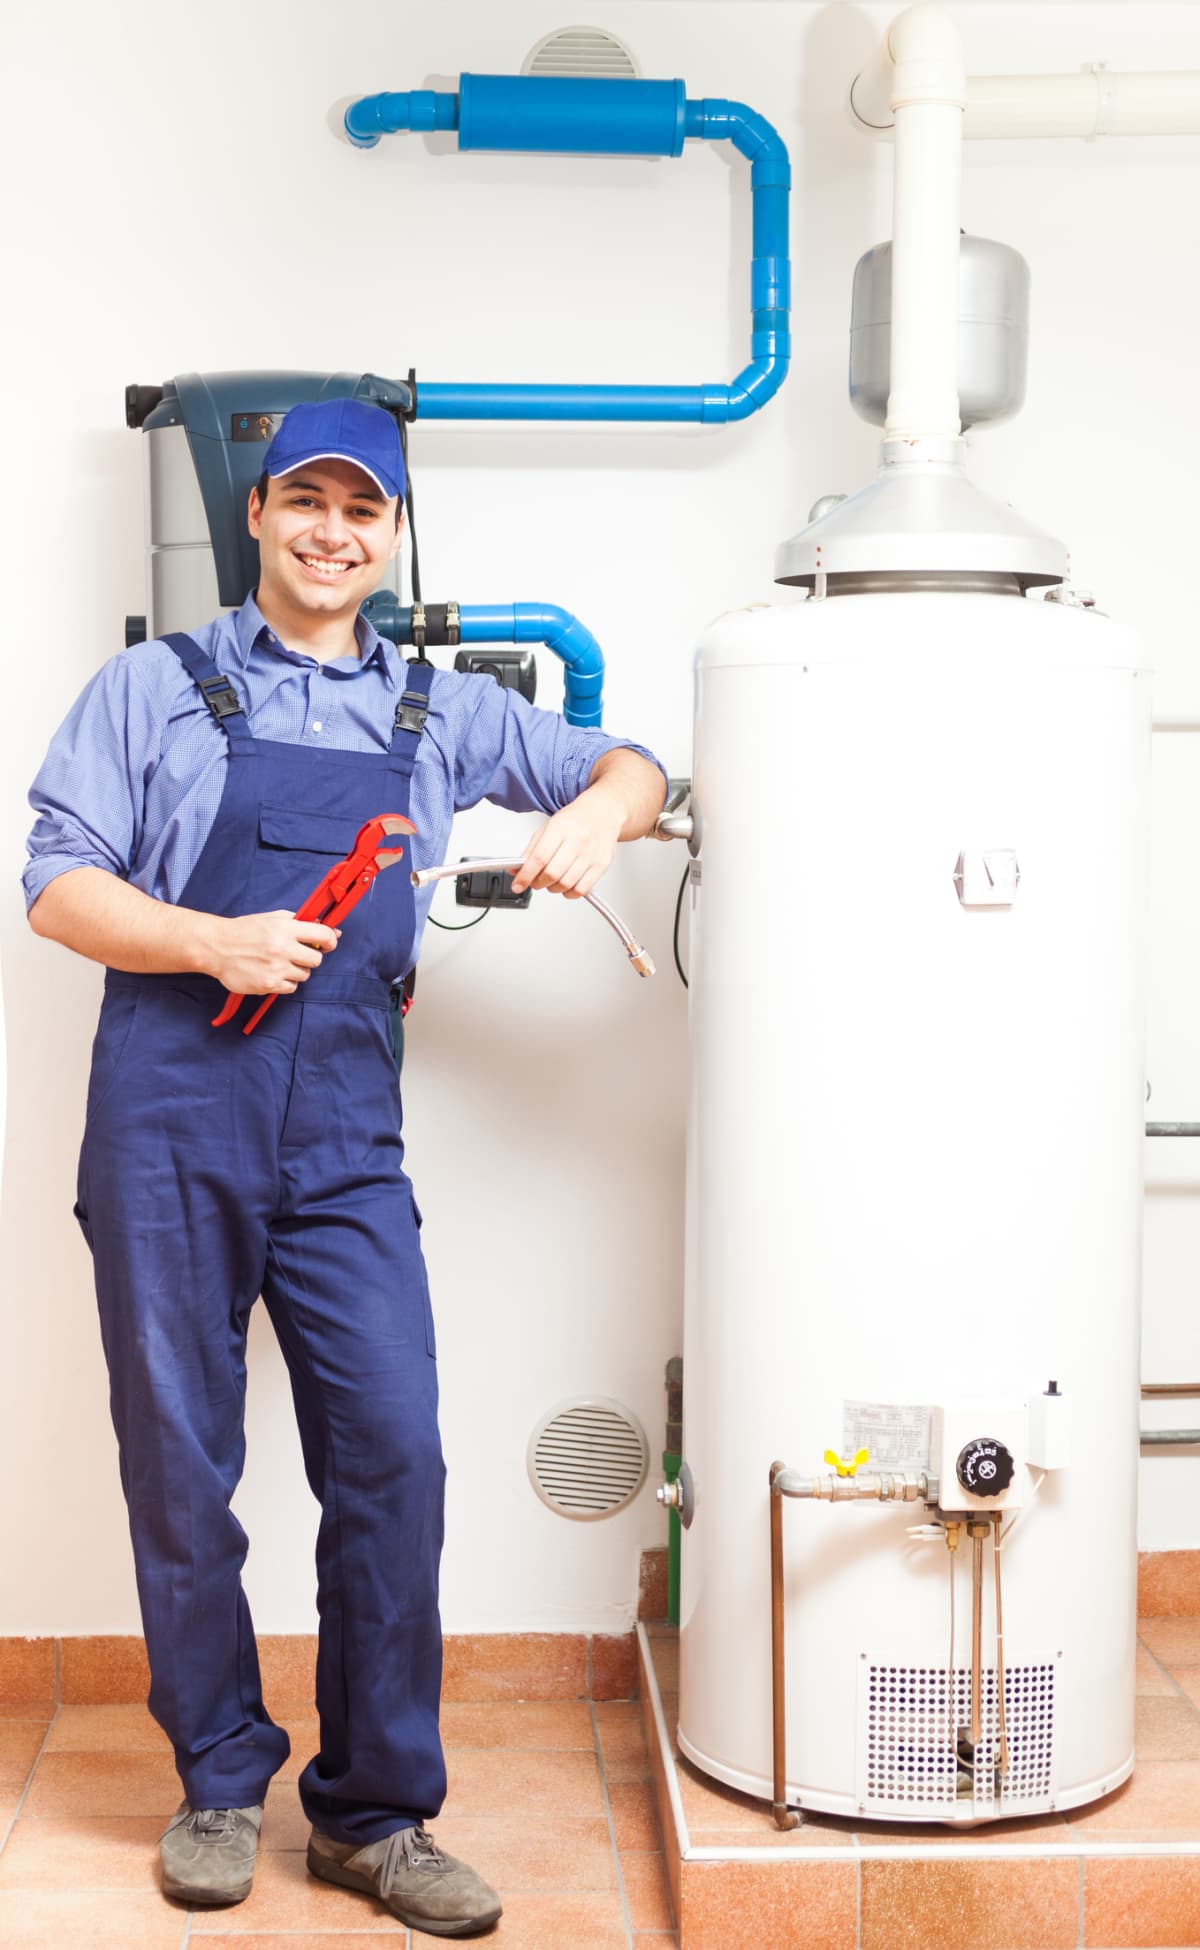 A technician in blue overalls standing by a hot water heater